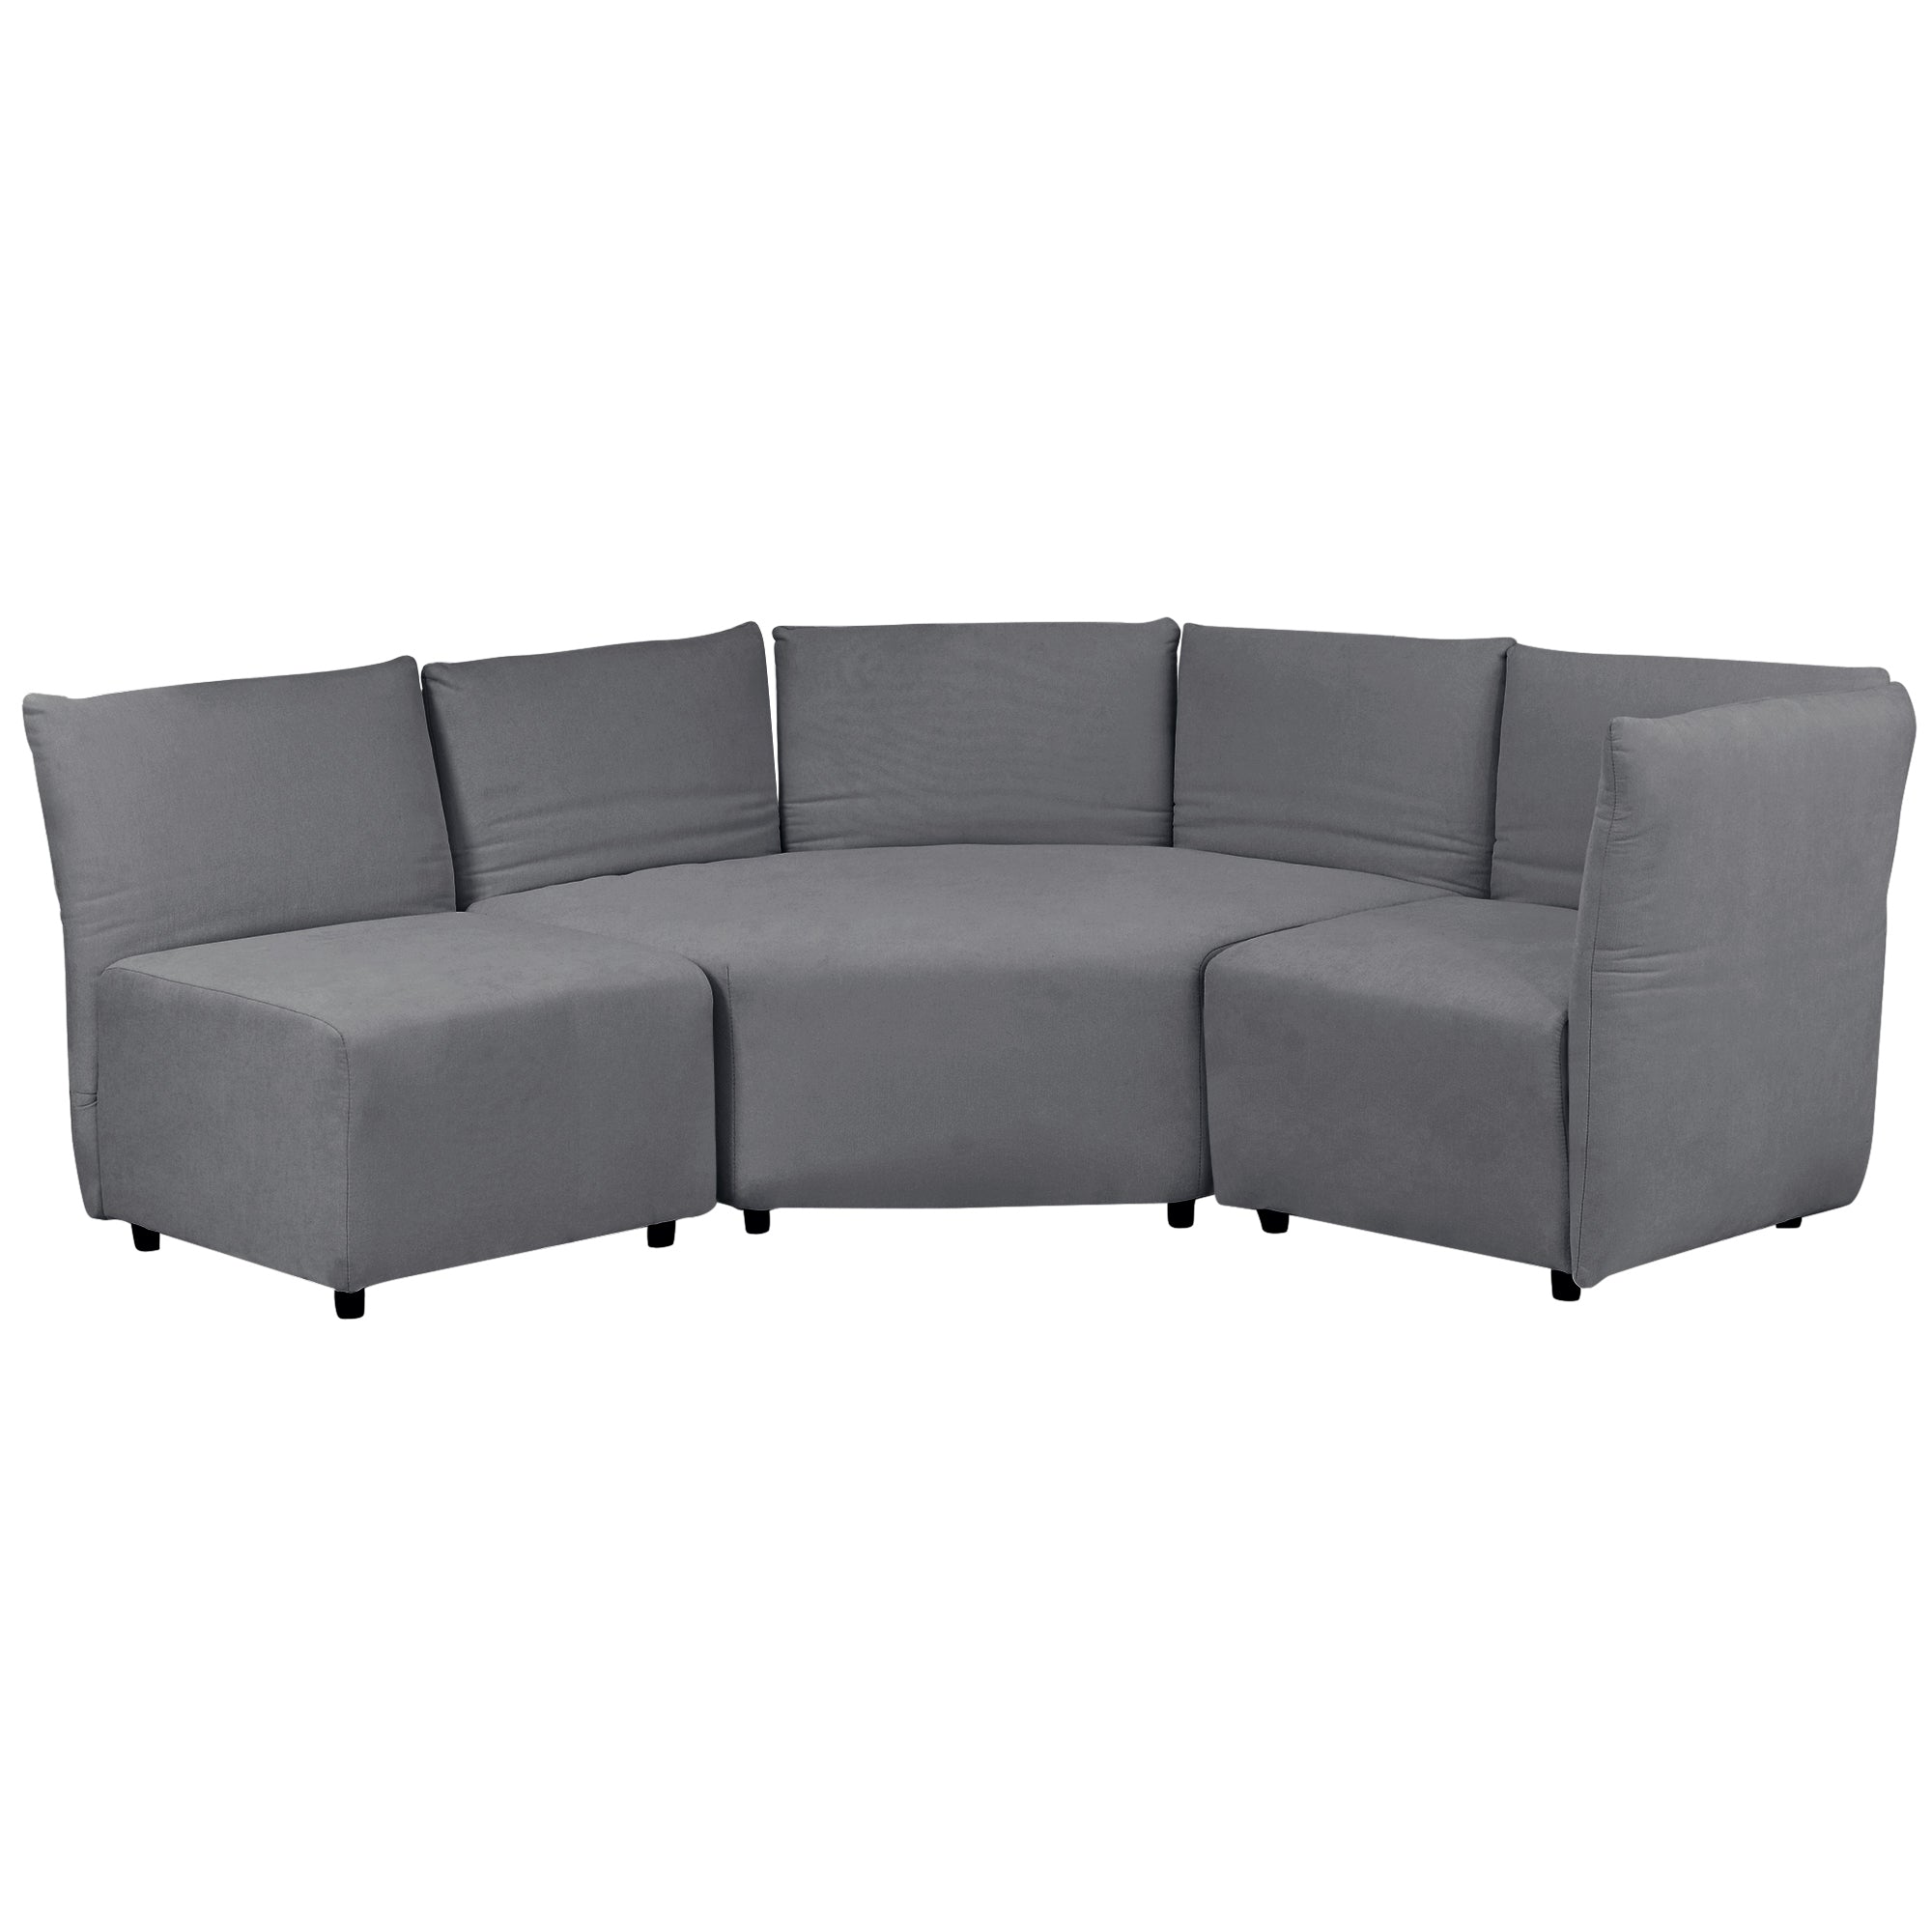 Stylish Sofa Set with Polyester Upholstery with Adjustable Back with Free Combination for Living Room - Gray